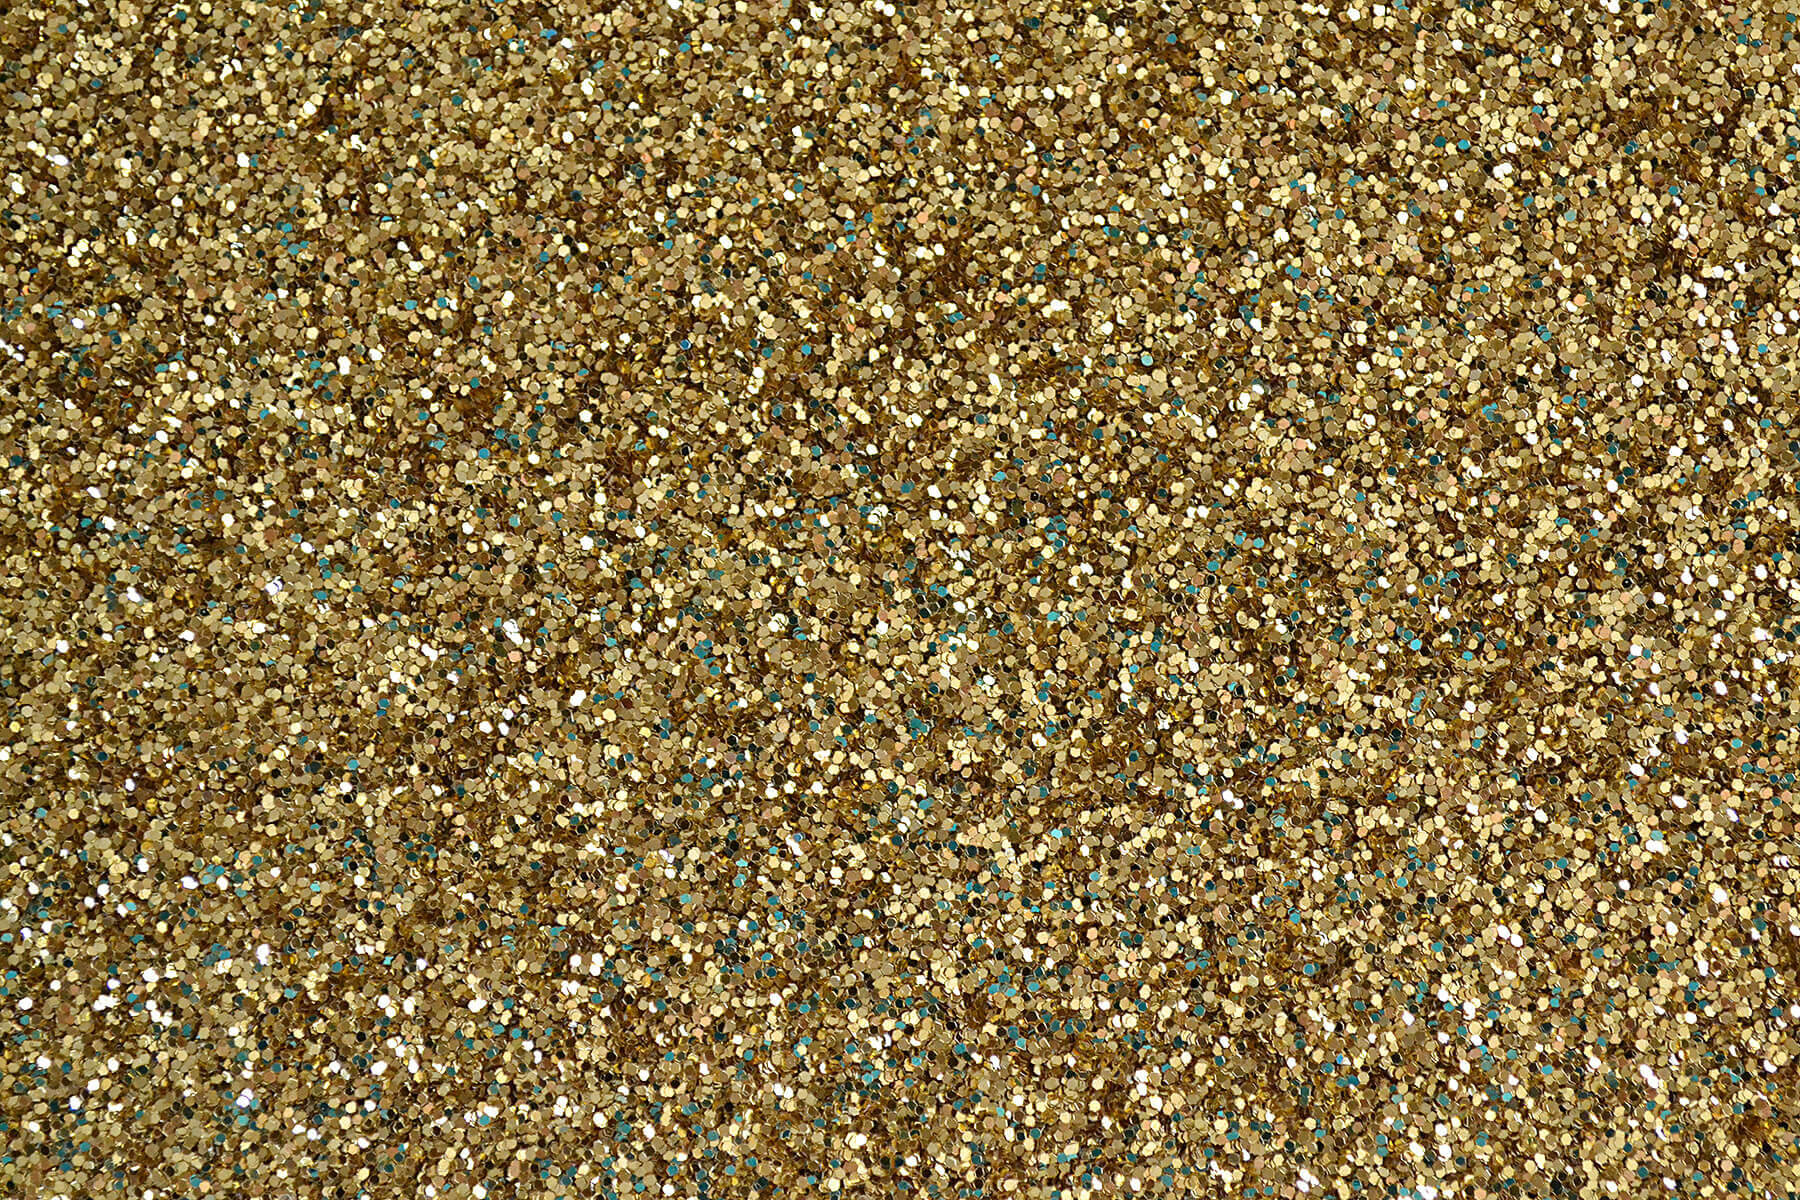 Background Gold Glitter Mint Green And